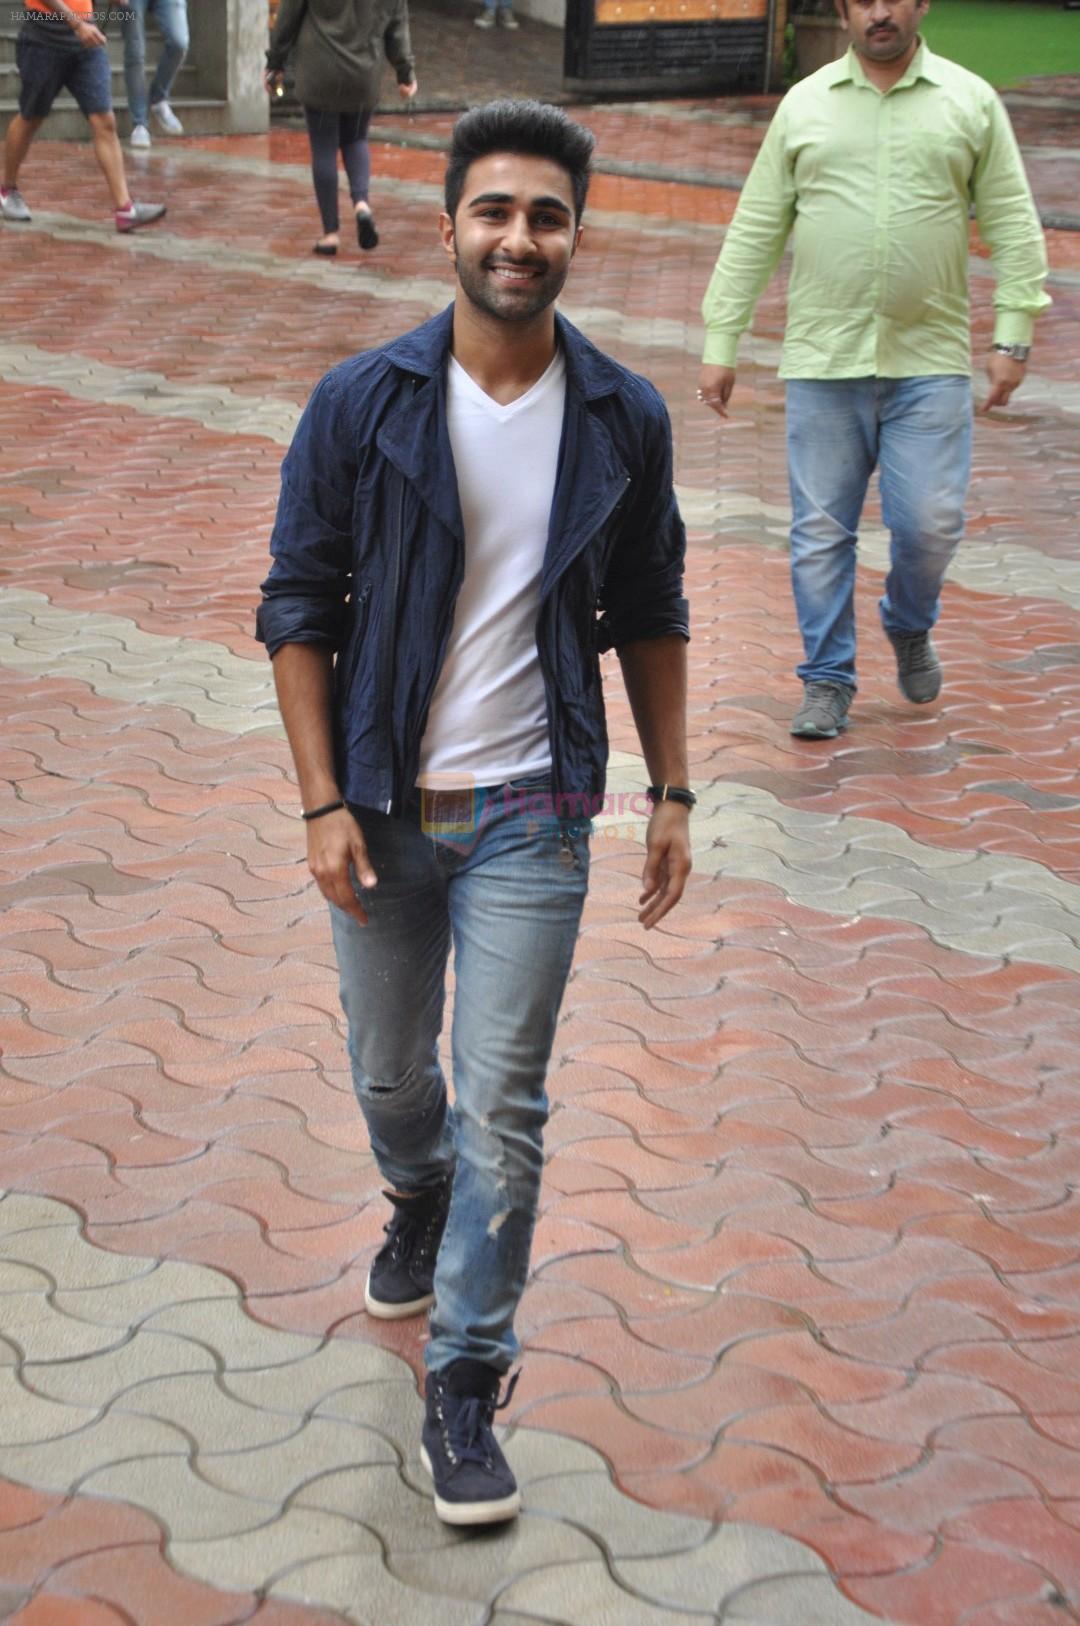 Aadar Jain at the Trailer Launch Of Film Qiadi Band on 18th July 2017